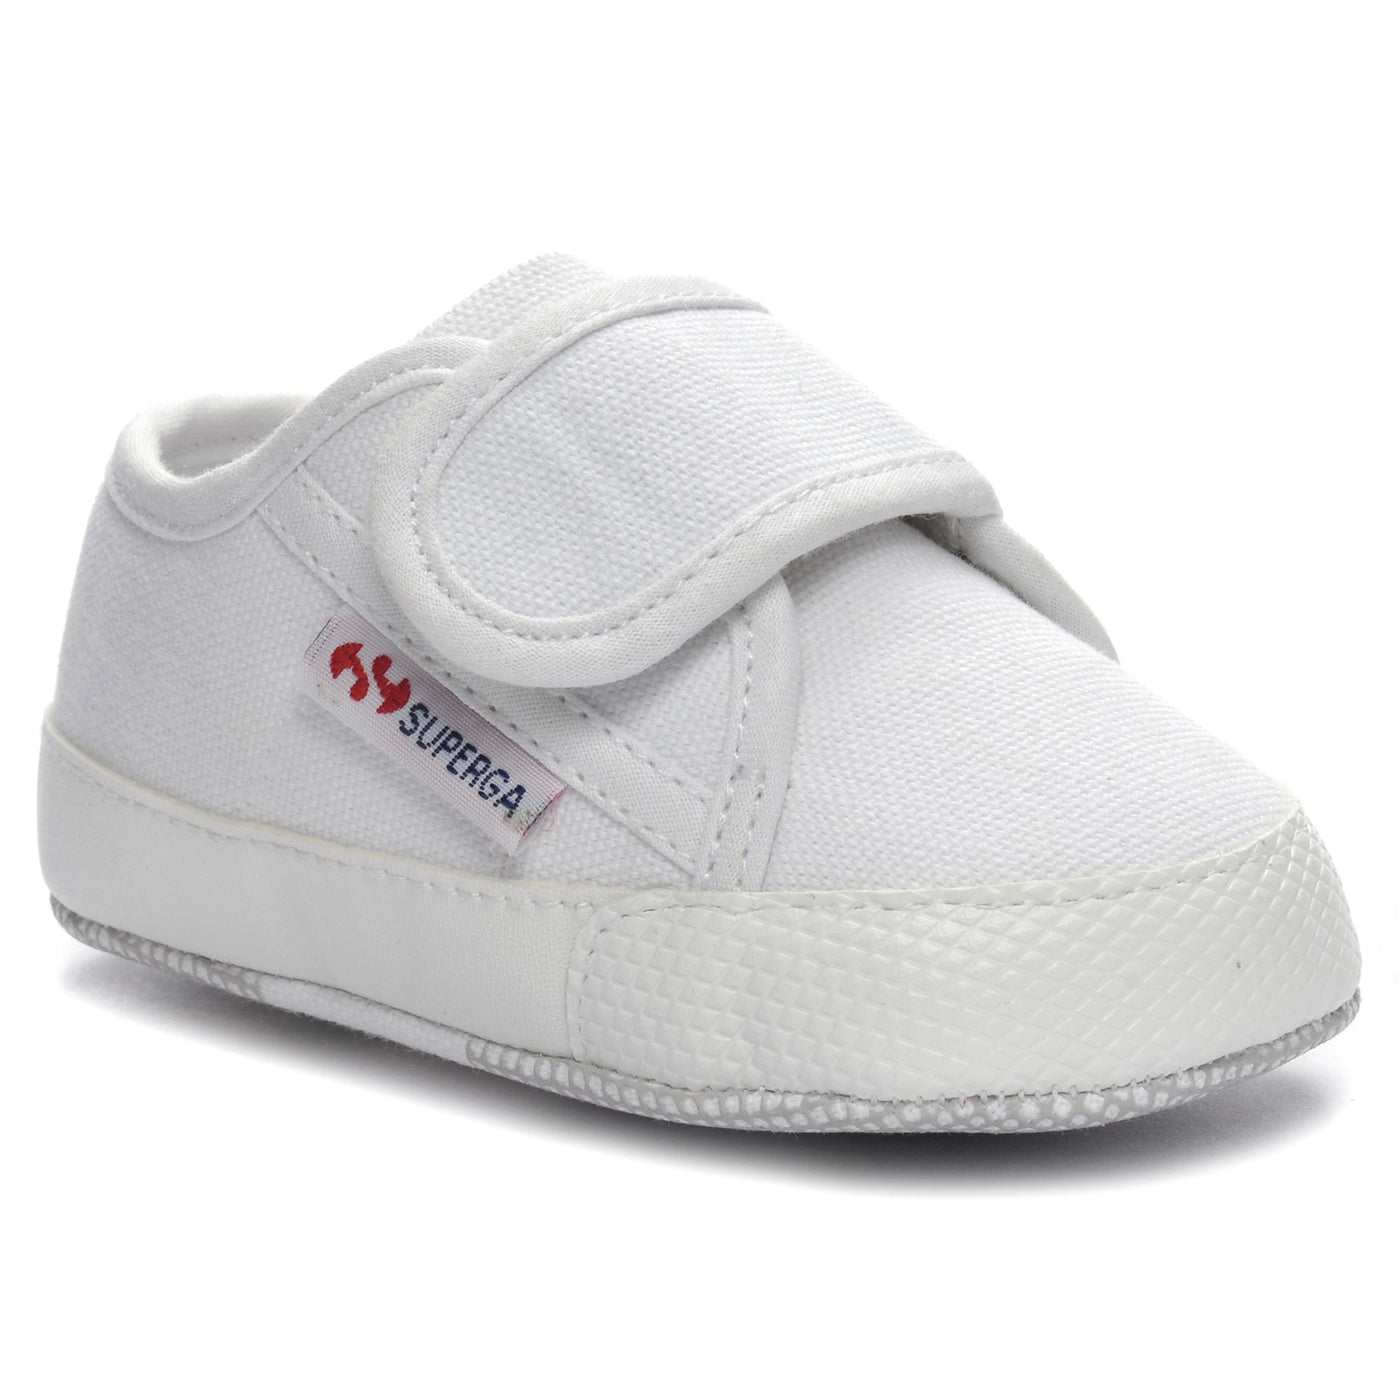 Sneakers Kid unisex 4006 BABY STRAP Low Cut WHITE | superga Detail Double				